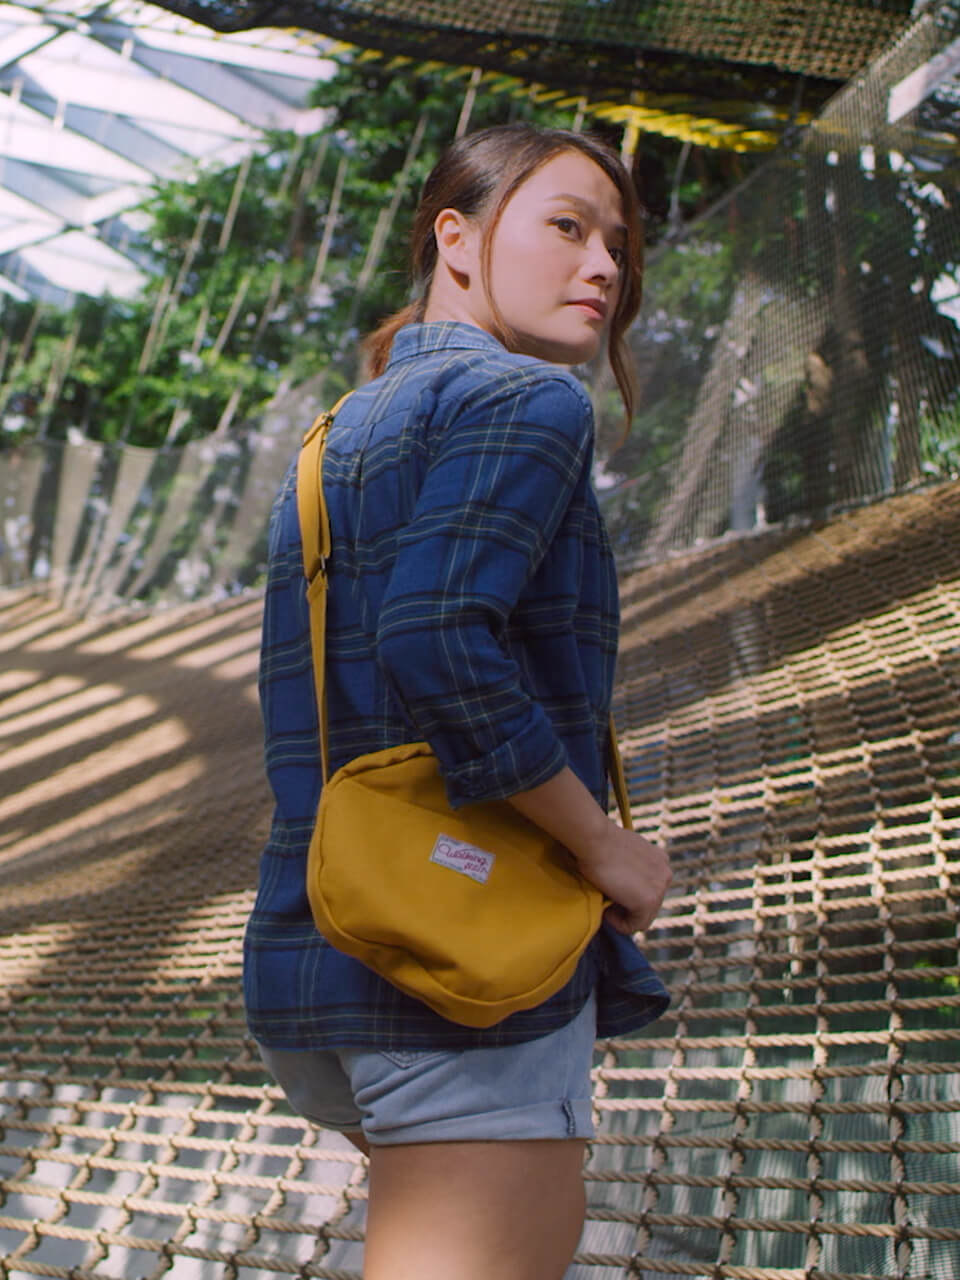 A girl with her hand on her bag, back facing the camera and showing her facial side profile.